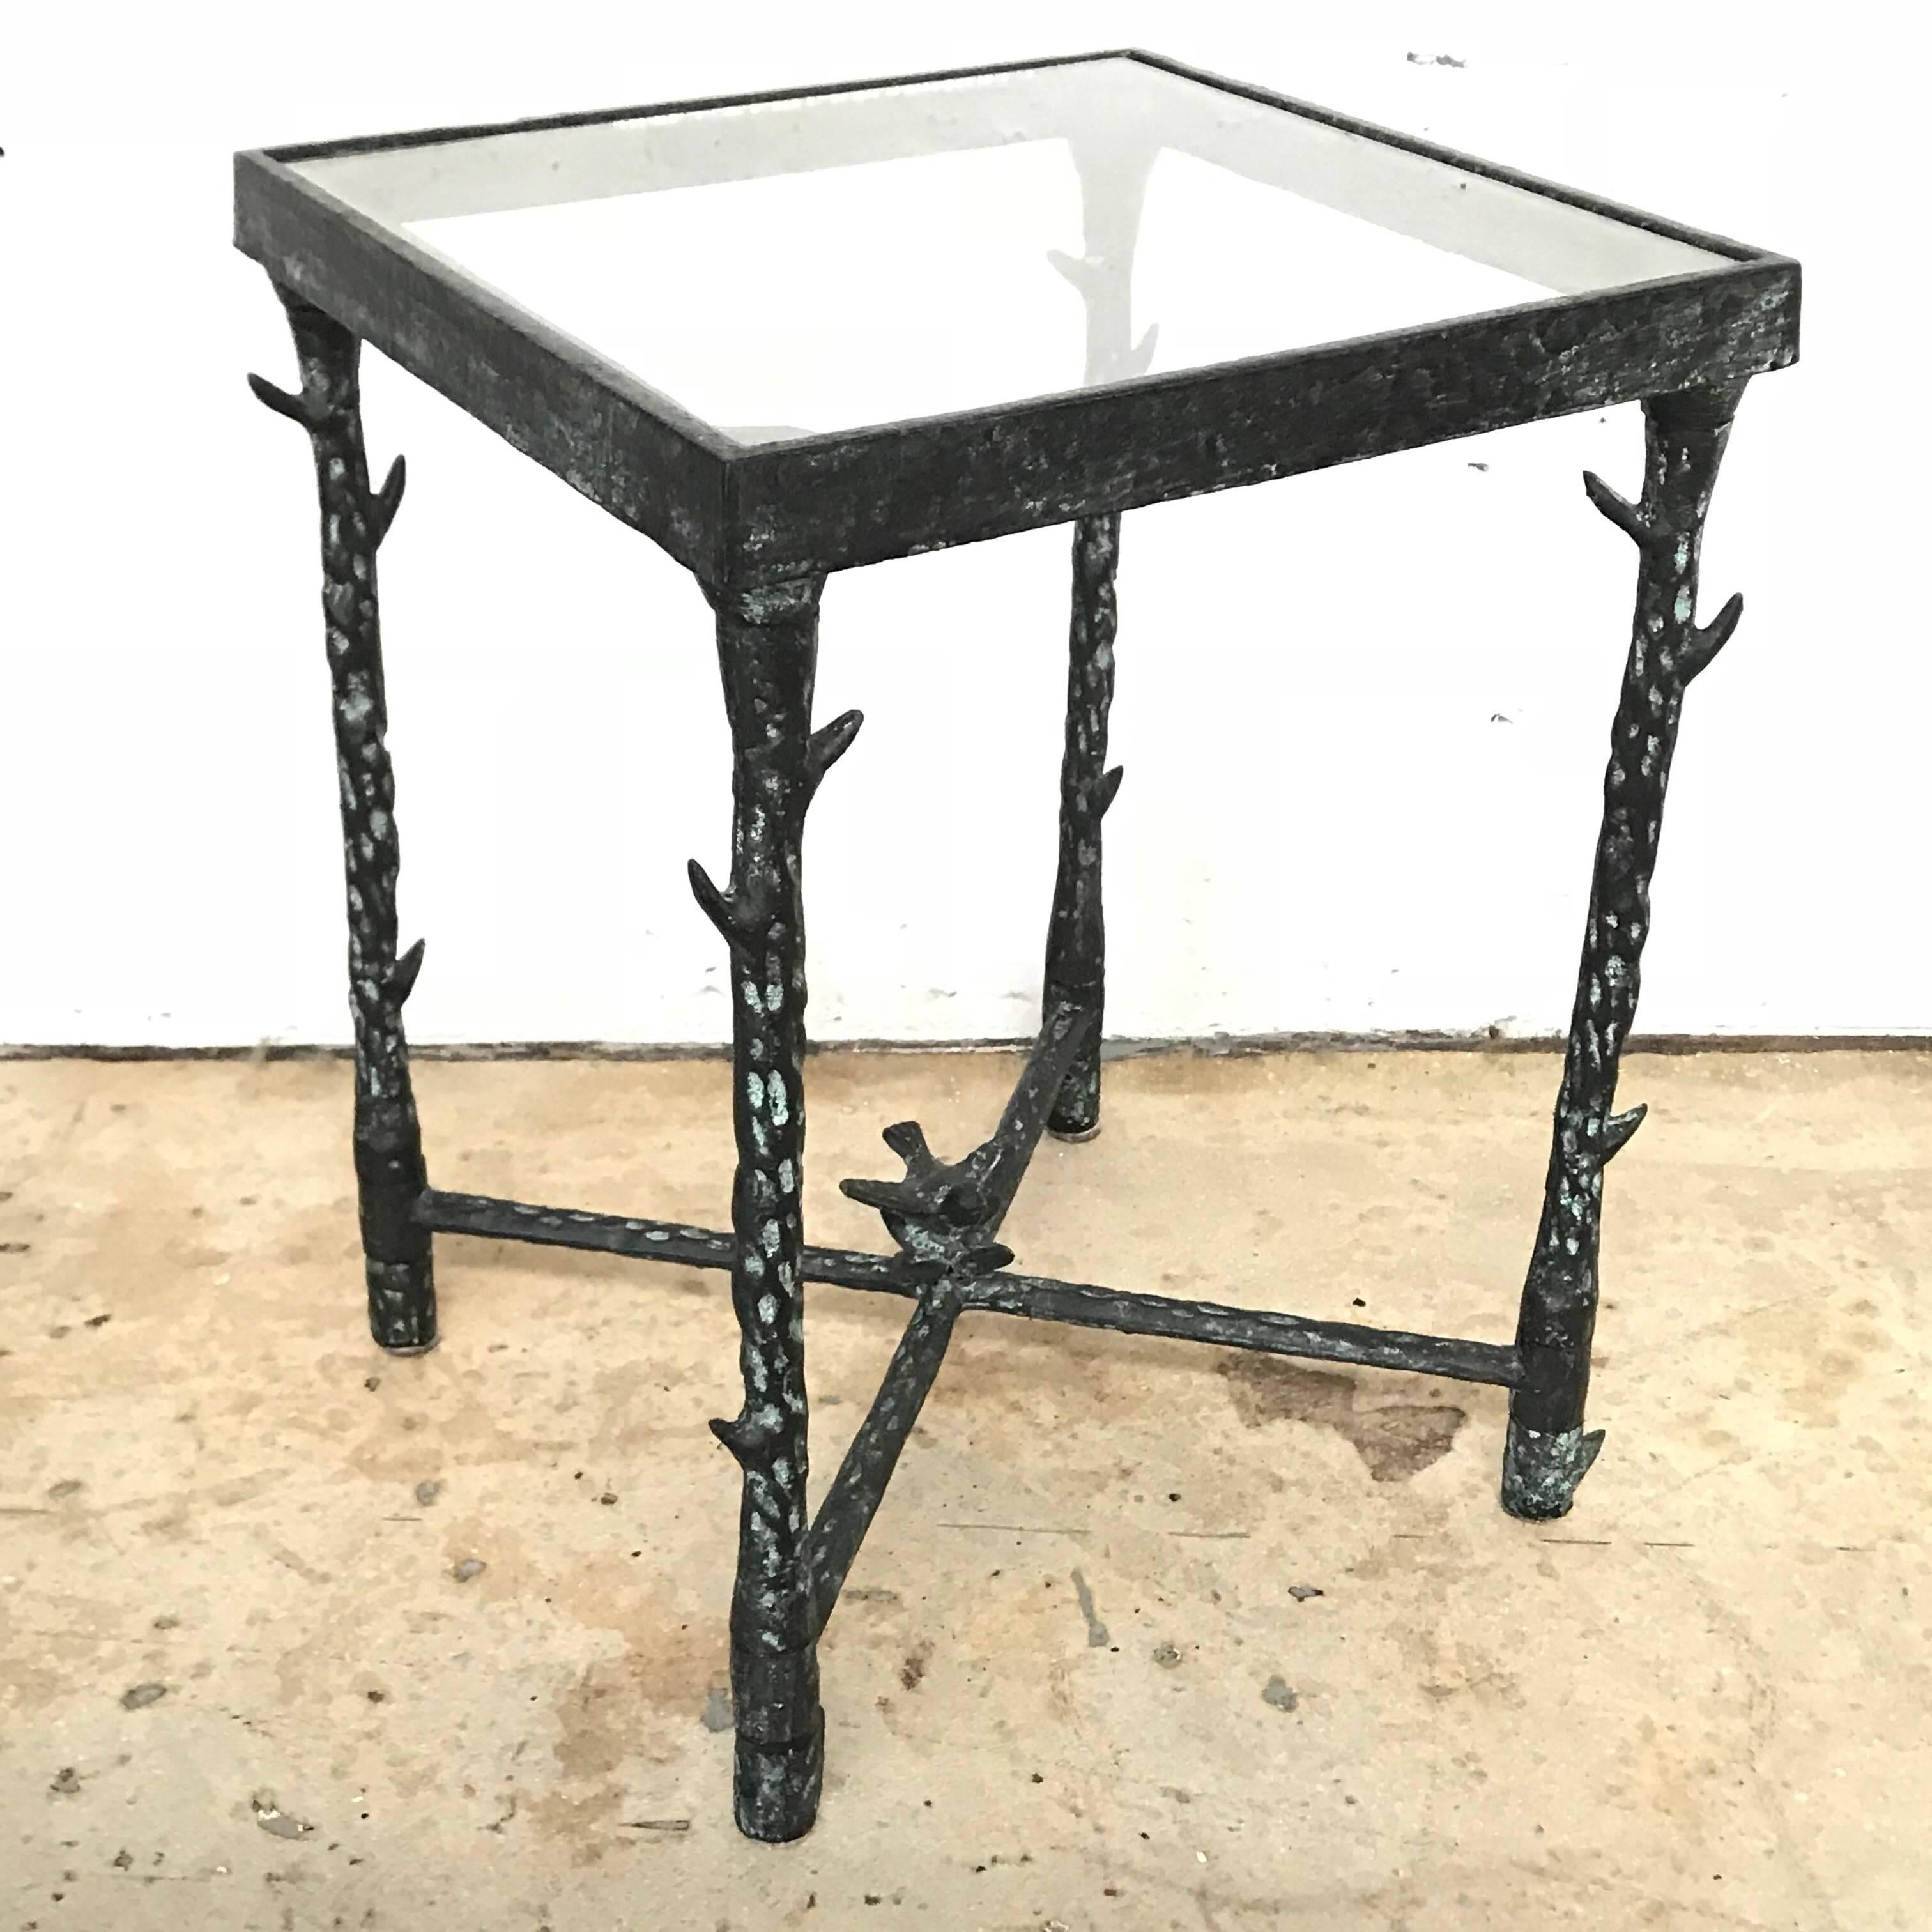 Brutalist table with a faux bois thorn branch frame and flower and bird motif rendered in bronze and glass, designed by Ilana Goor, Israel, 1970s.